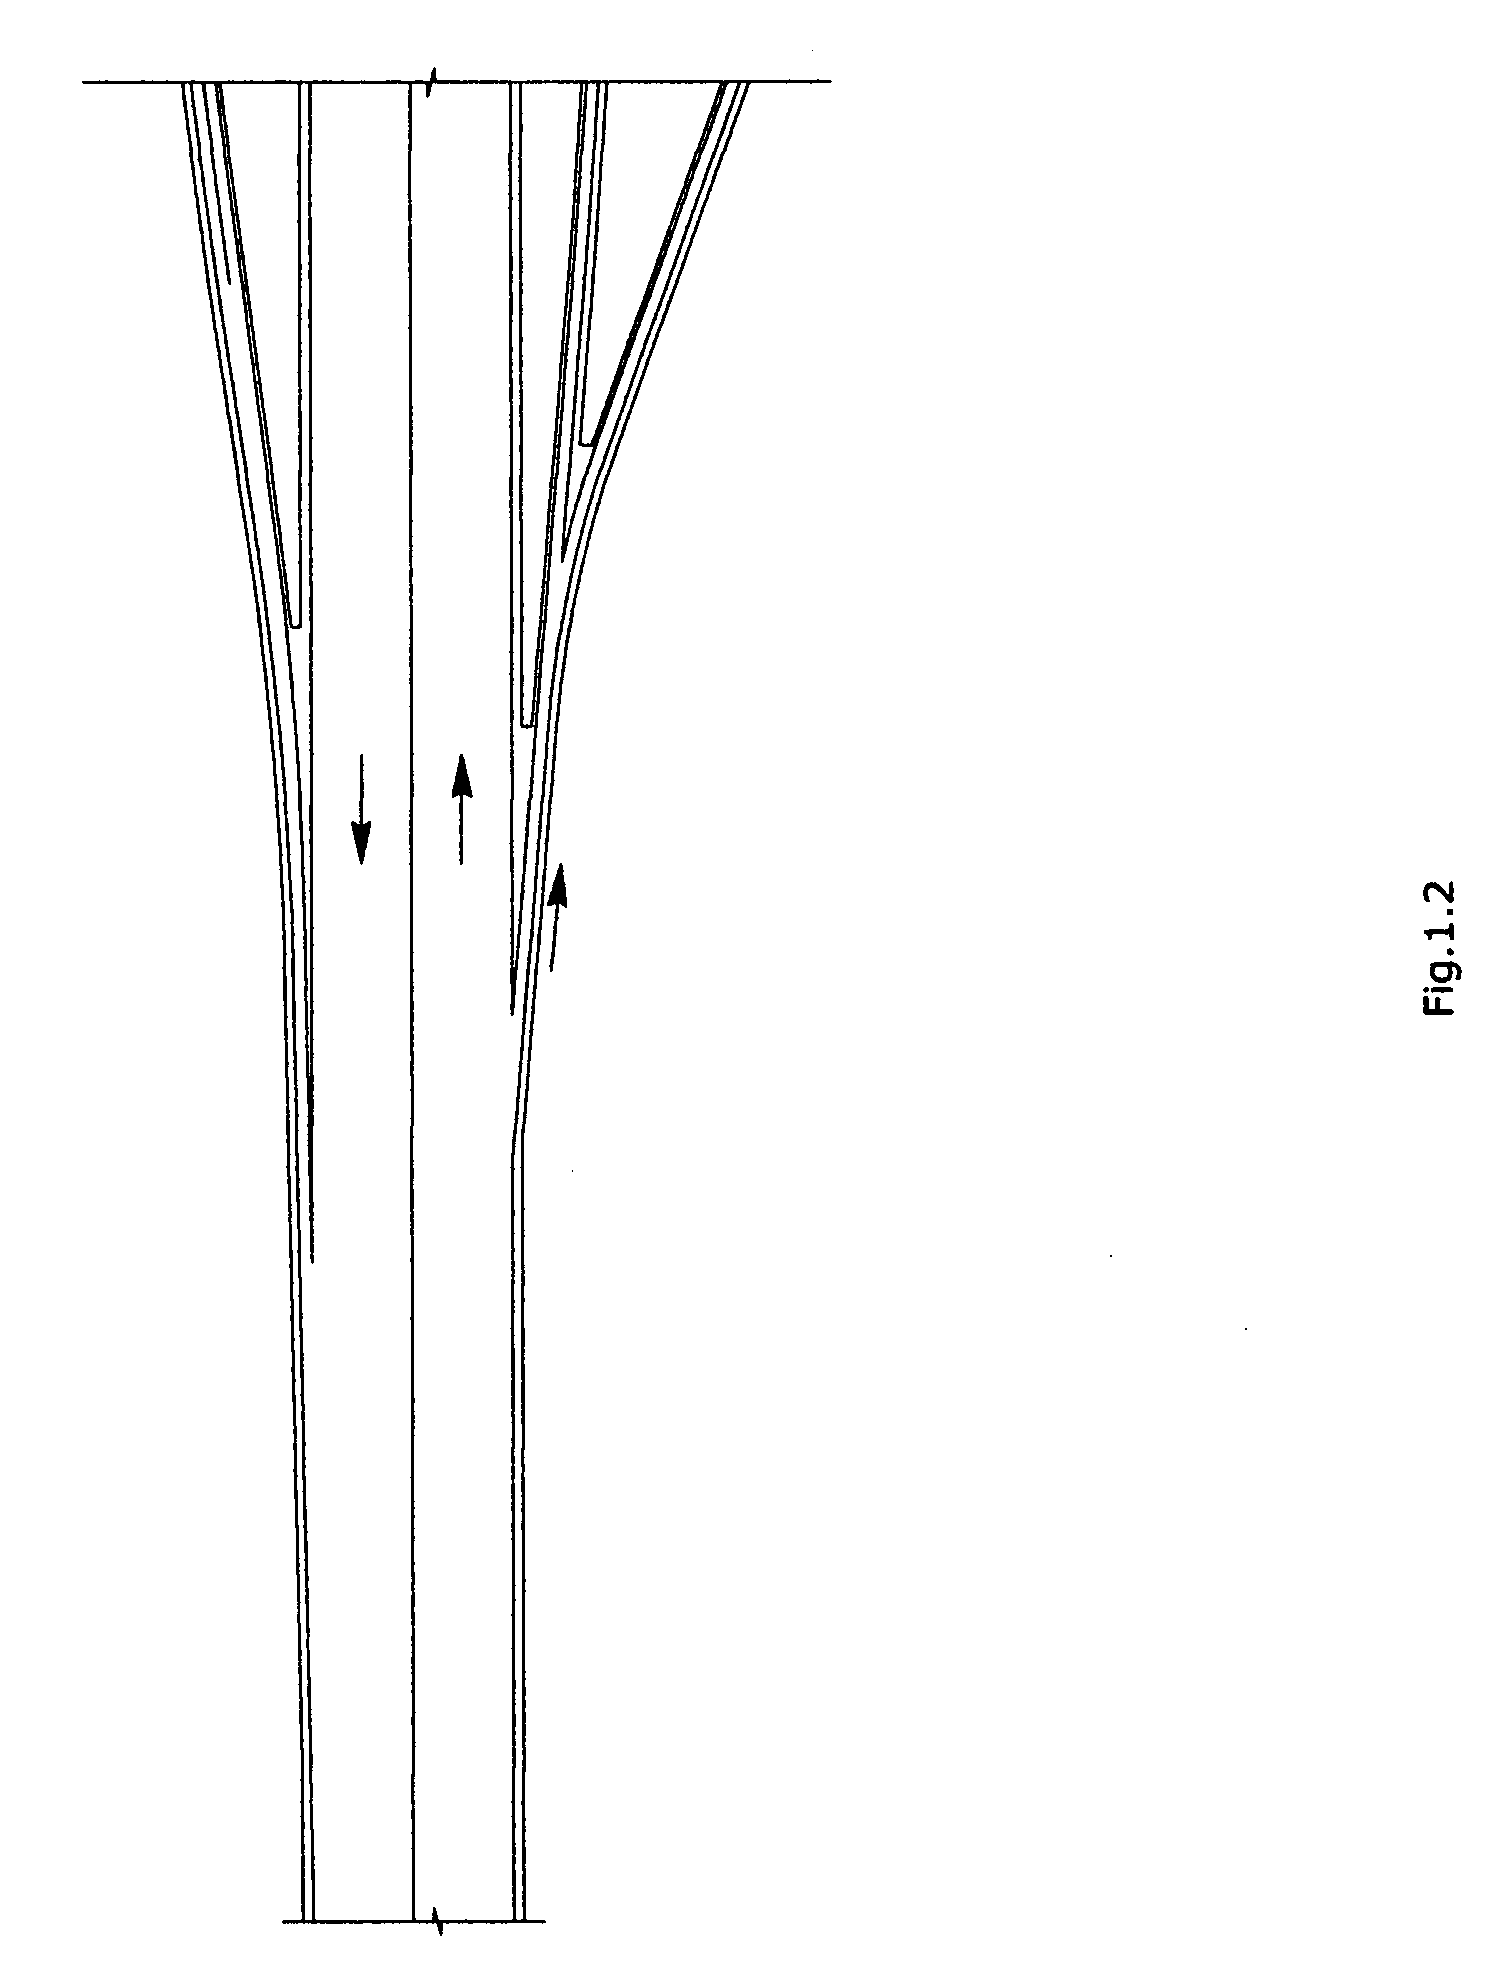 Weaving free two level cloverleaf type interchange for a highway crossing over a street